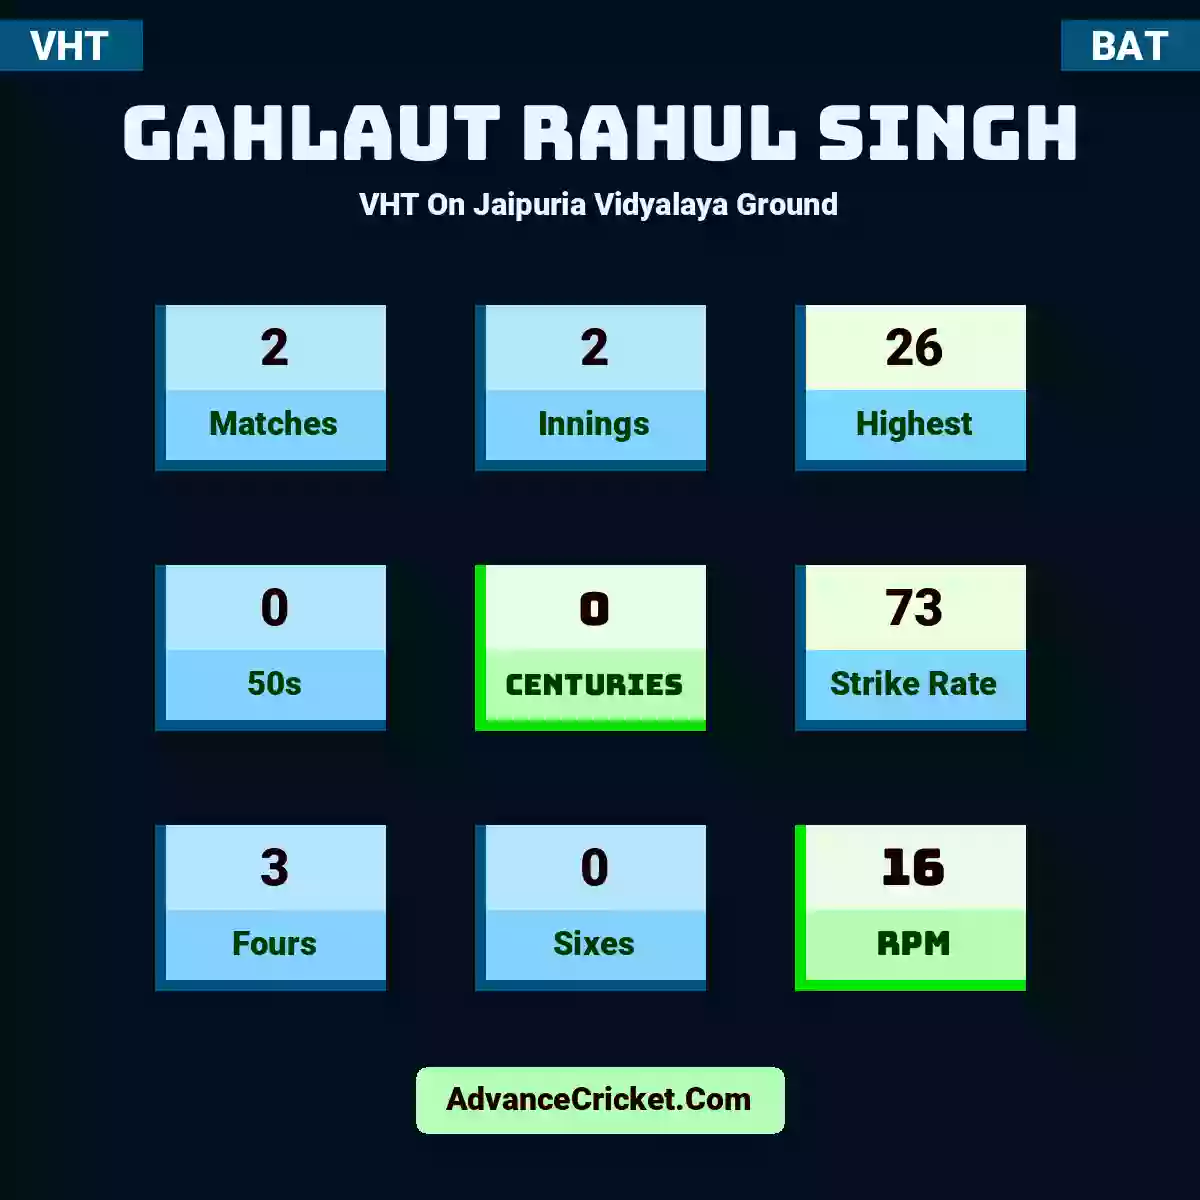 Gahlaut Rahul Singh VHT  On Jaipuria Vidyalaya Ground, Gahlaut Rahul Singh played 2 matches, scored 26 runs as highest, 0 half-centuries, and 0 centuries, with a strike rate of 73. G.Singh hit 3 fours and 0 sixes, with an RPM of 16.